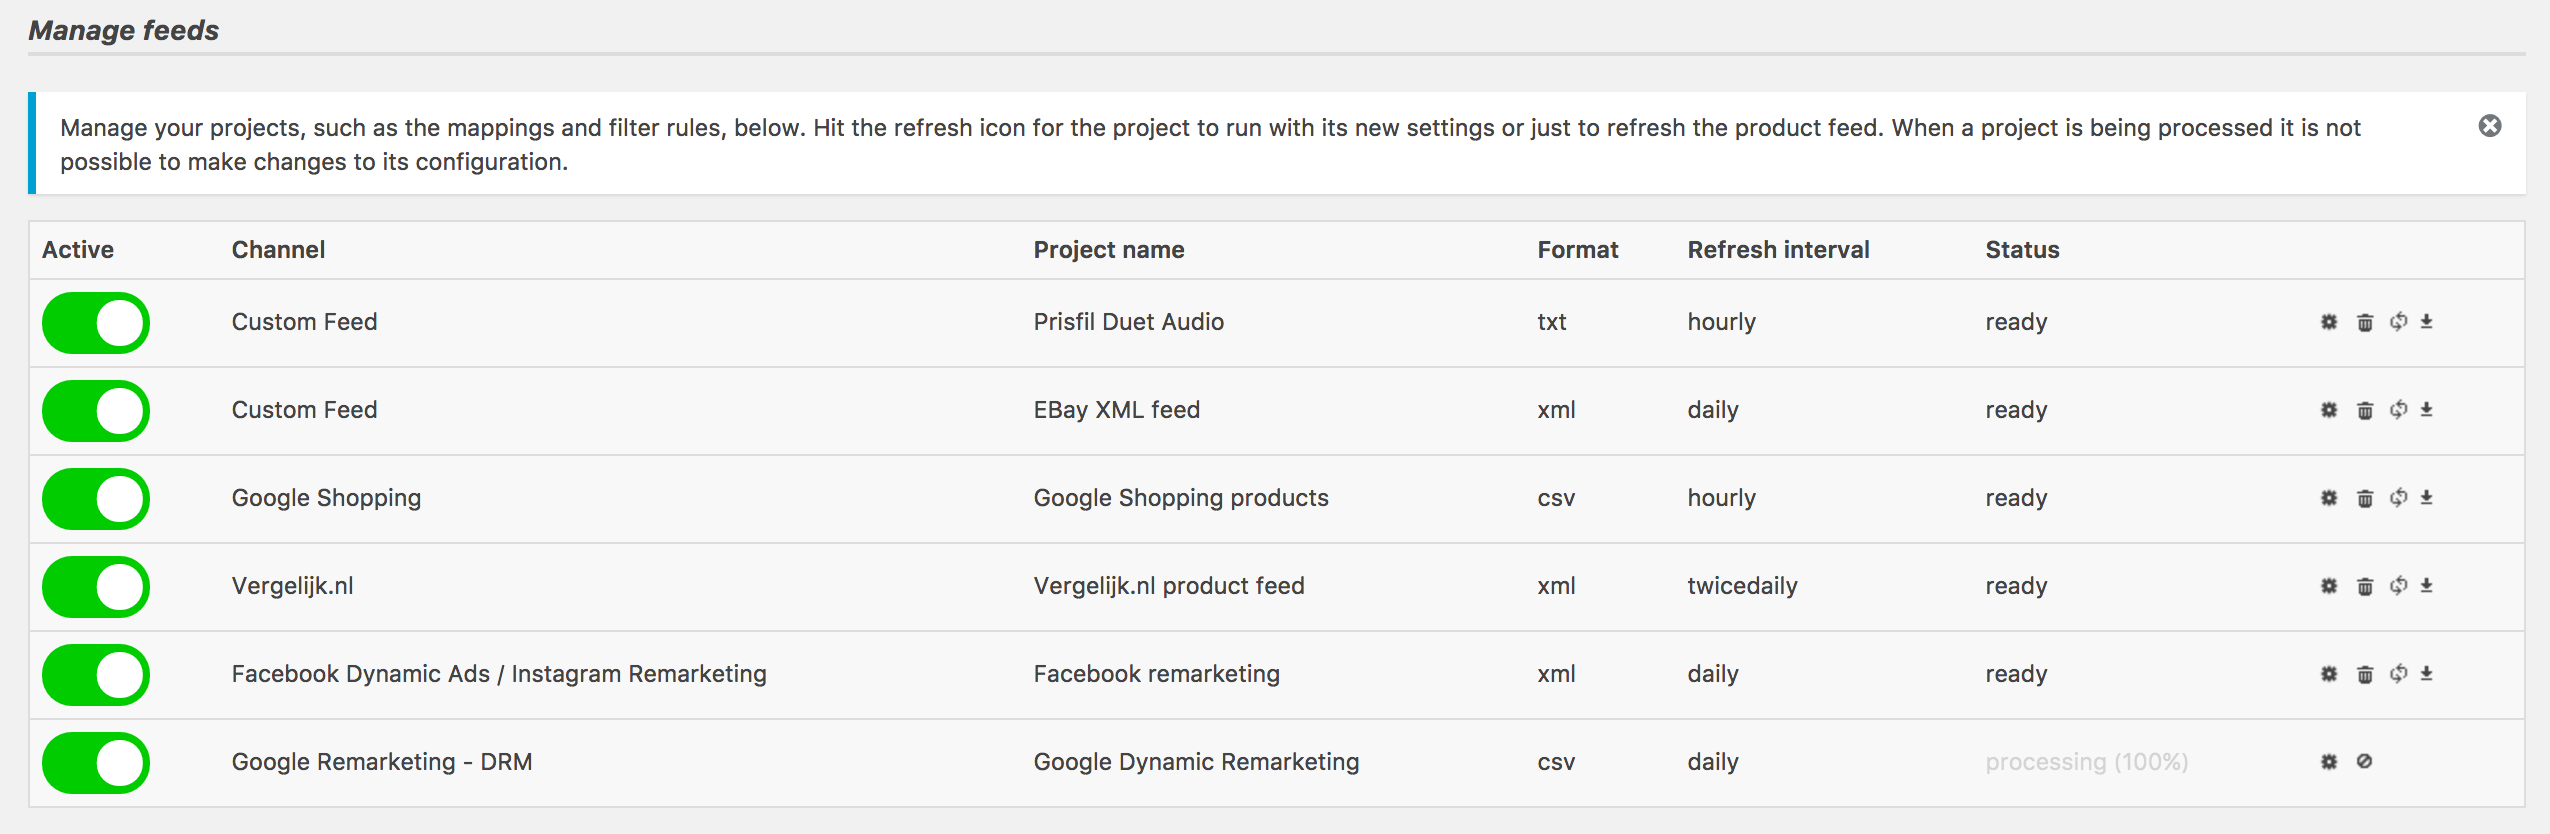 From within the manage feeds section you can control, (re)confige and activate or pause your product feed projects